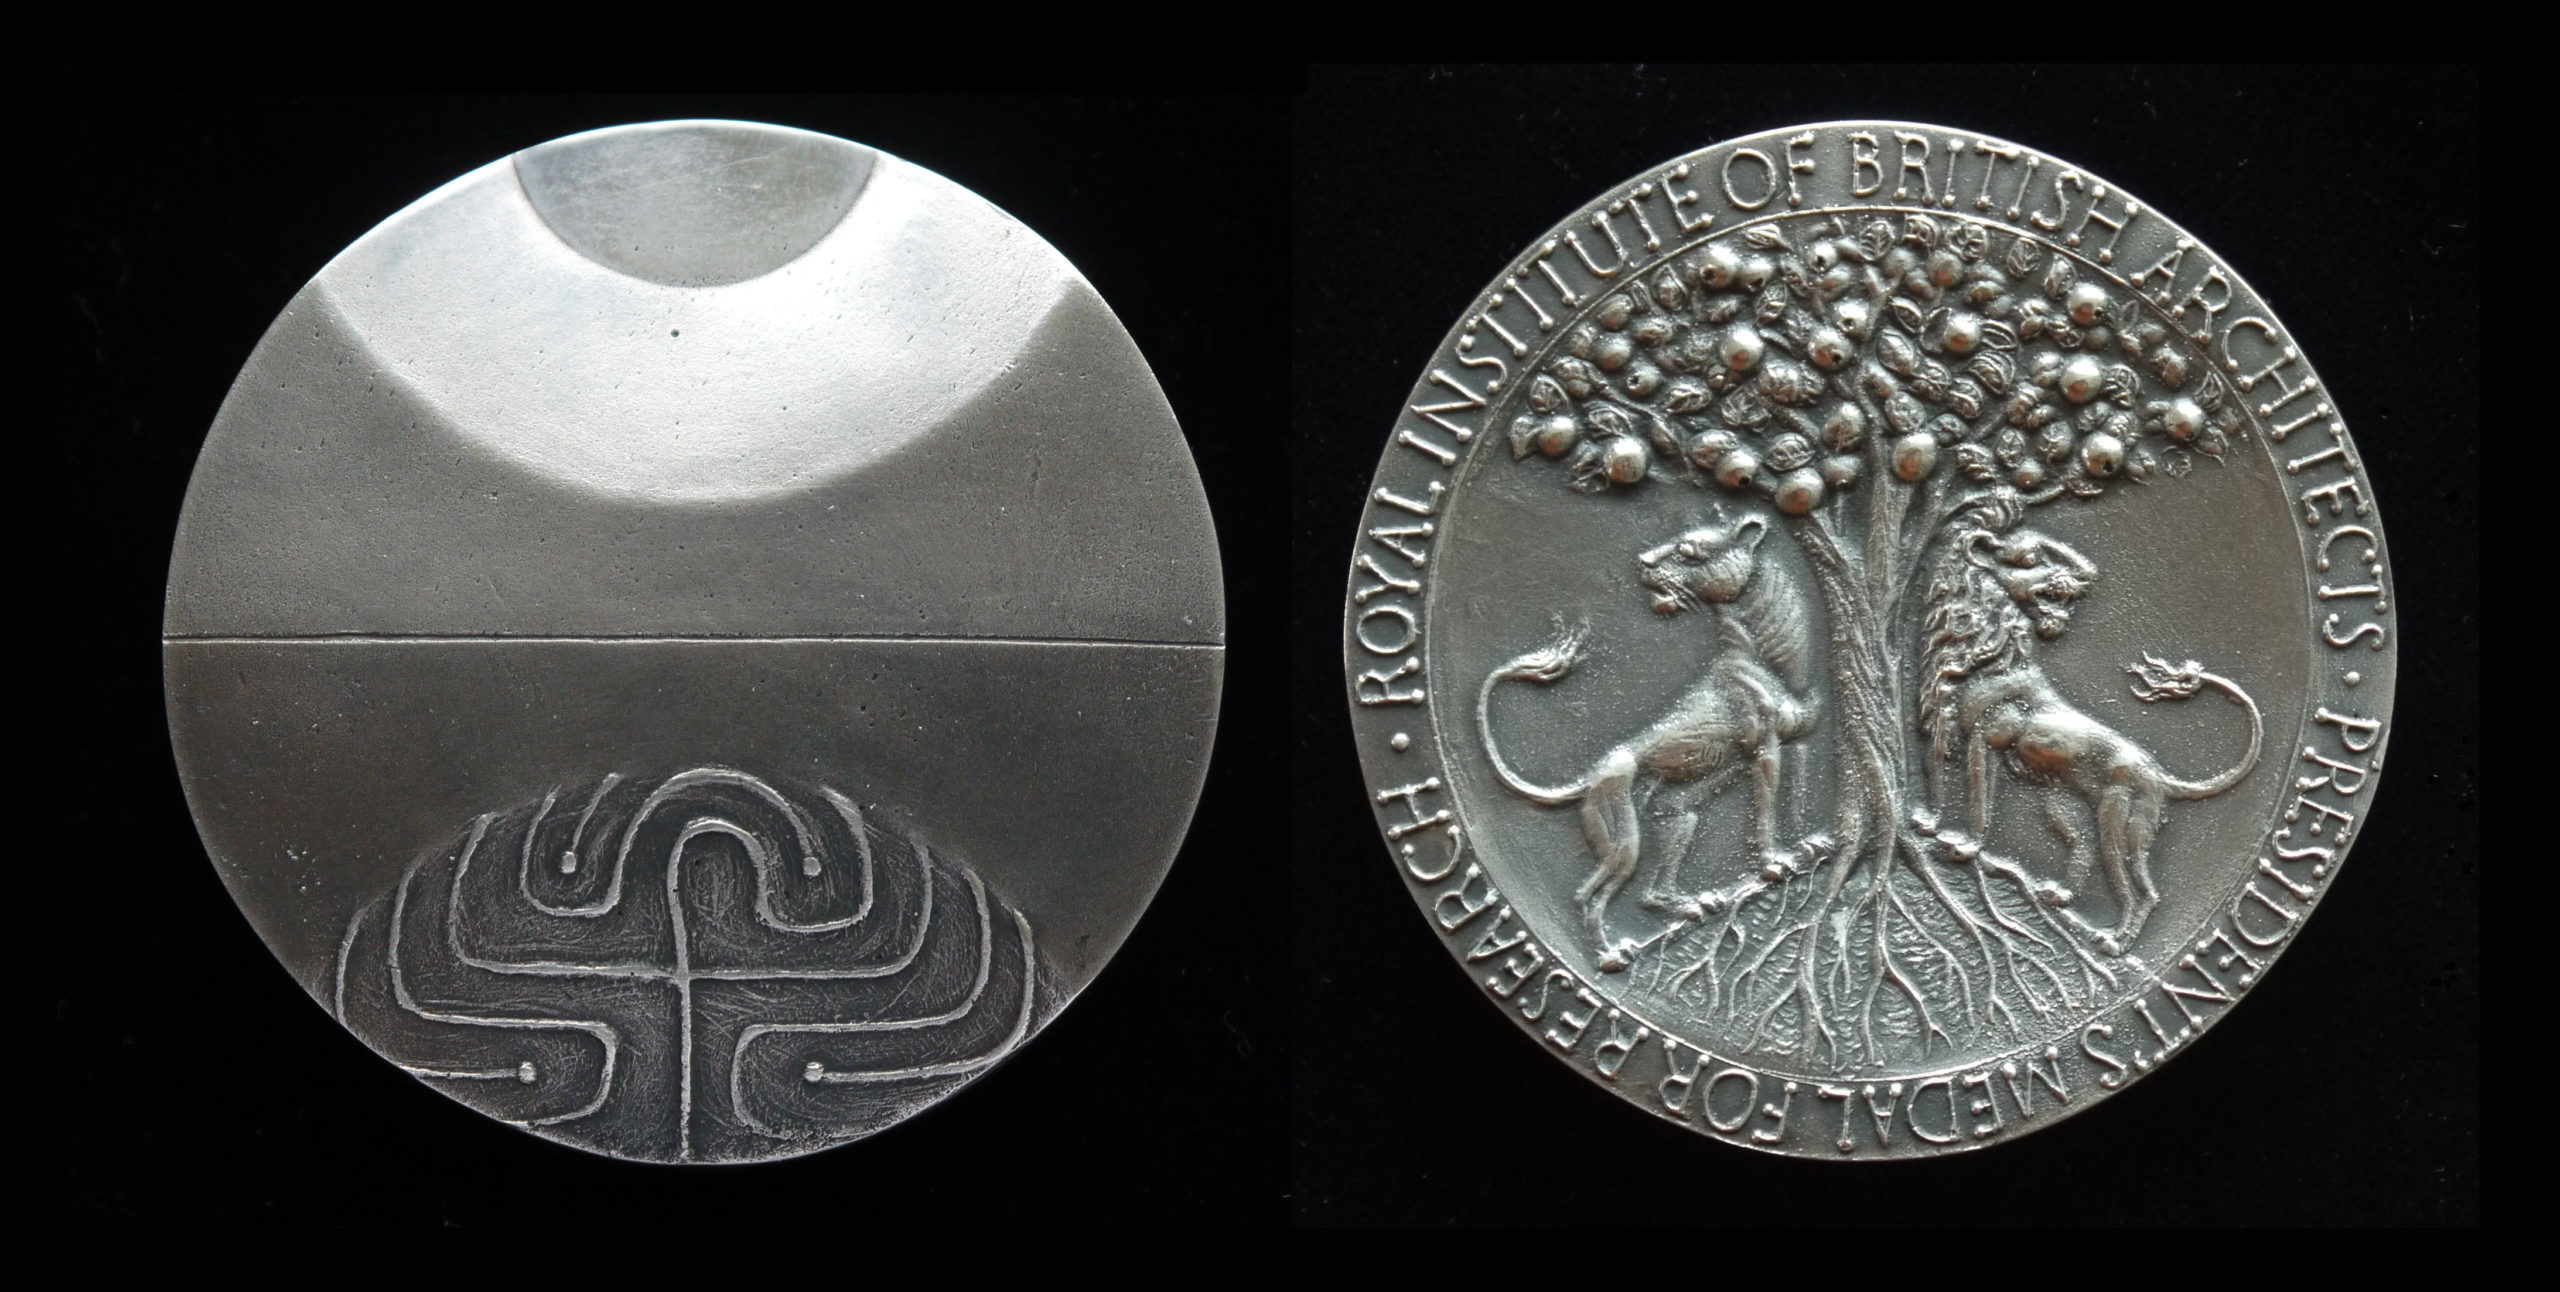 New RIBA Research Medal by Nicola Moss and Simon Beeson